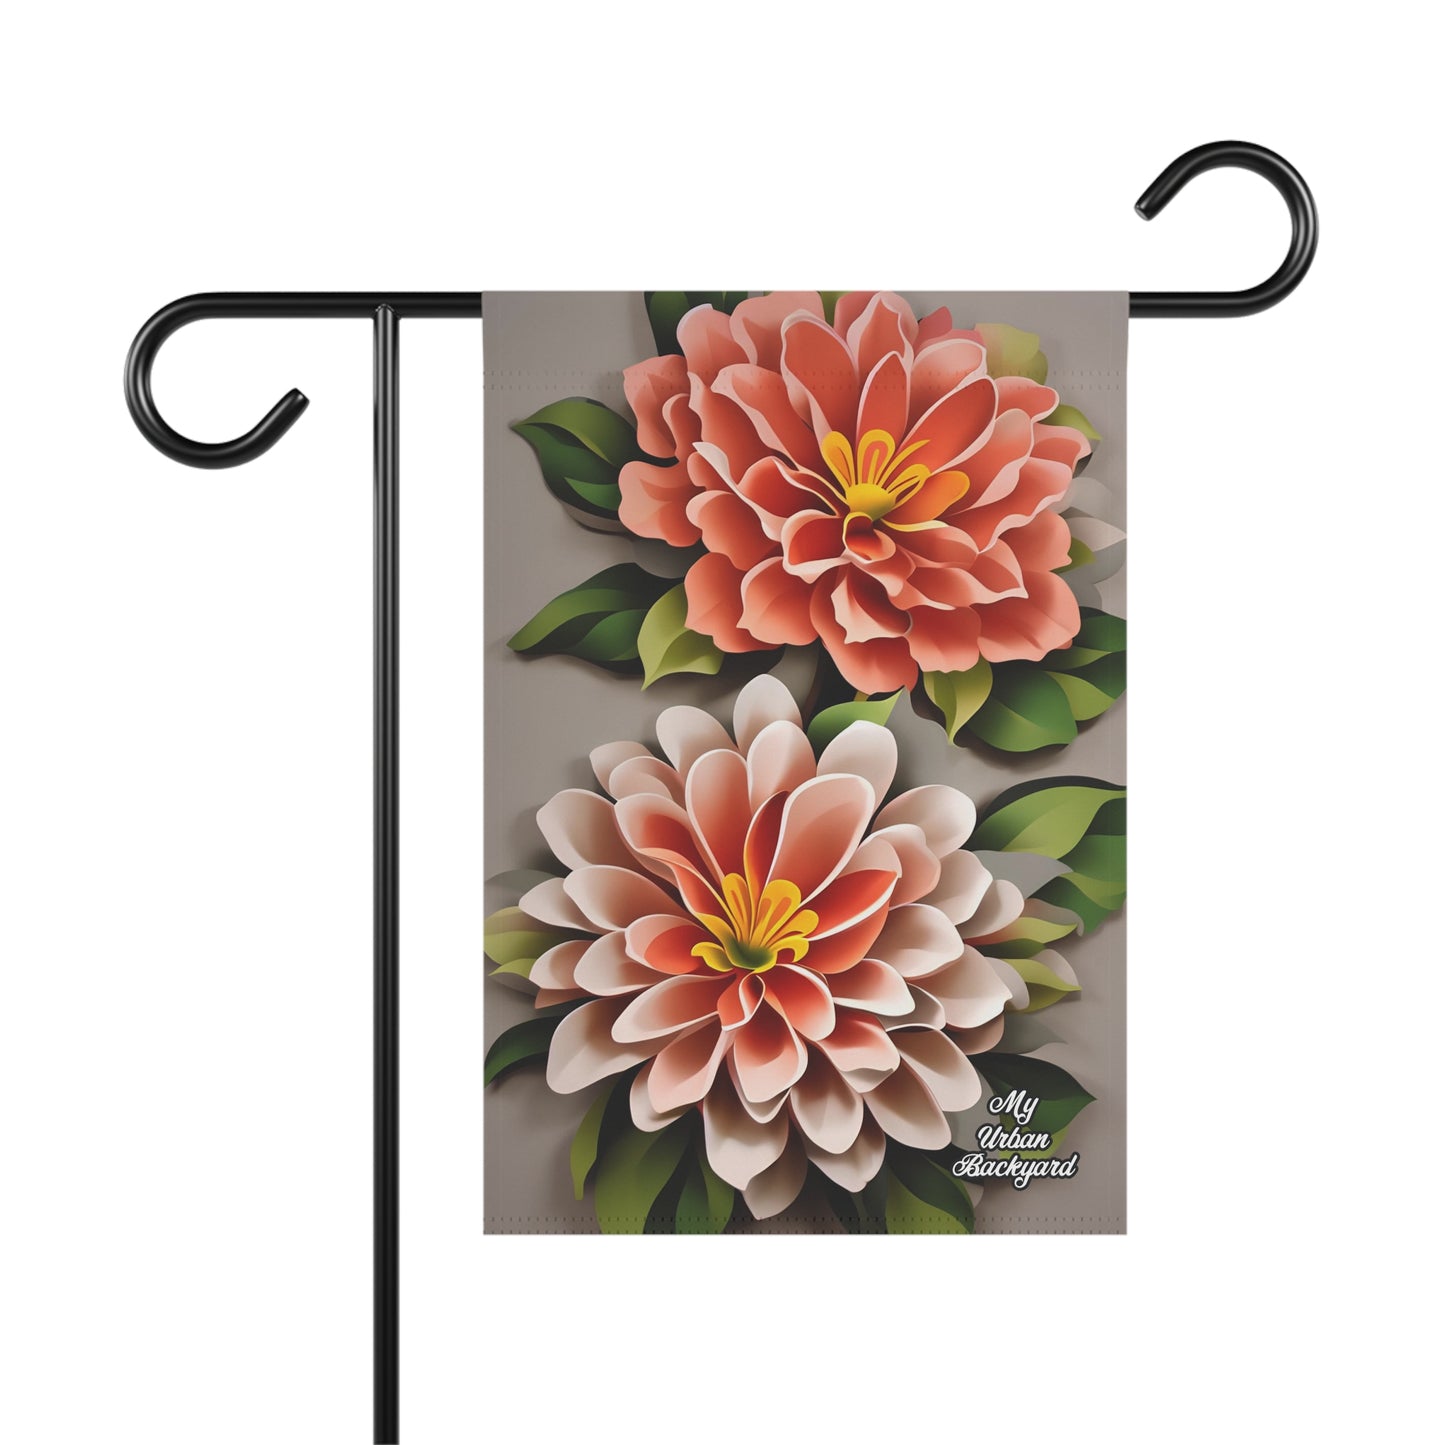 Peach-Colored Flowers, Garden Flag for Yard, Patio, Porch, or Work, 12"x18" - Flag only